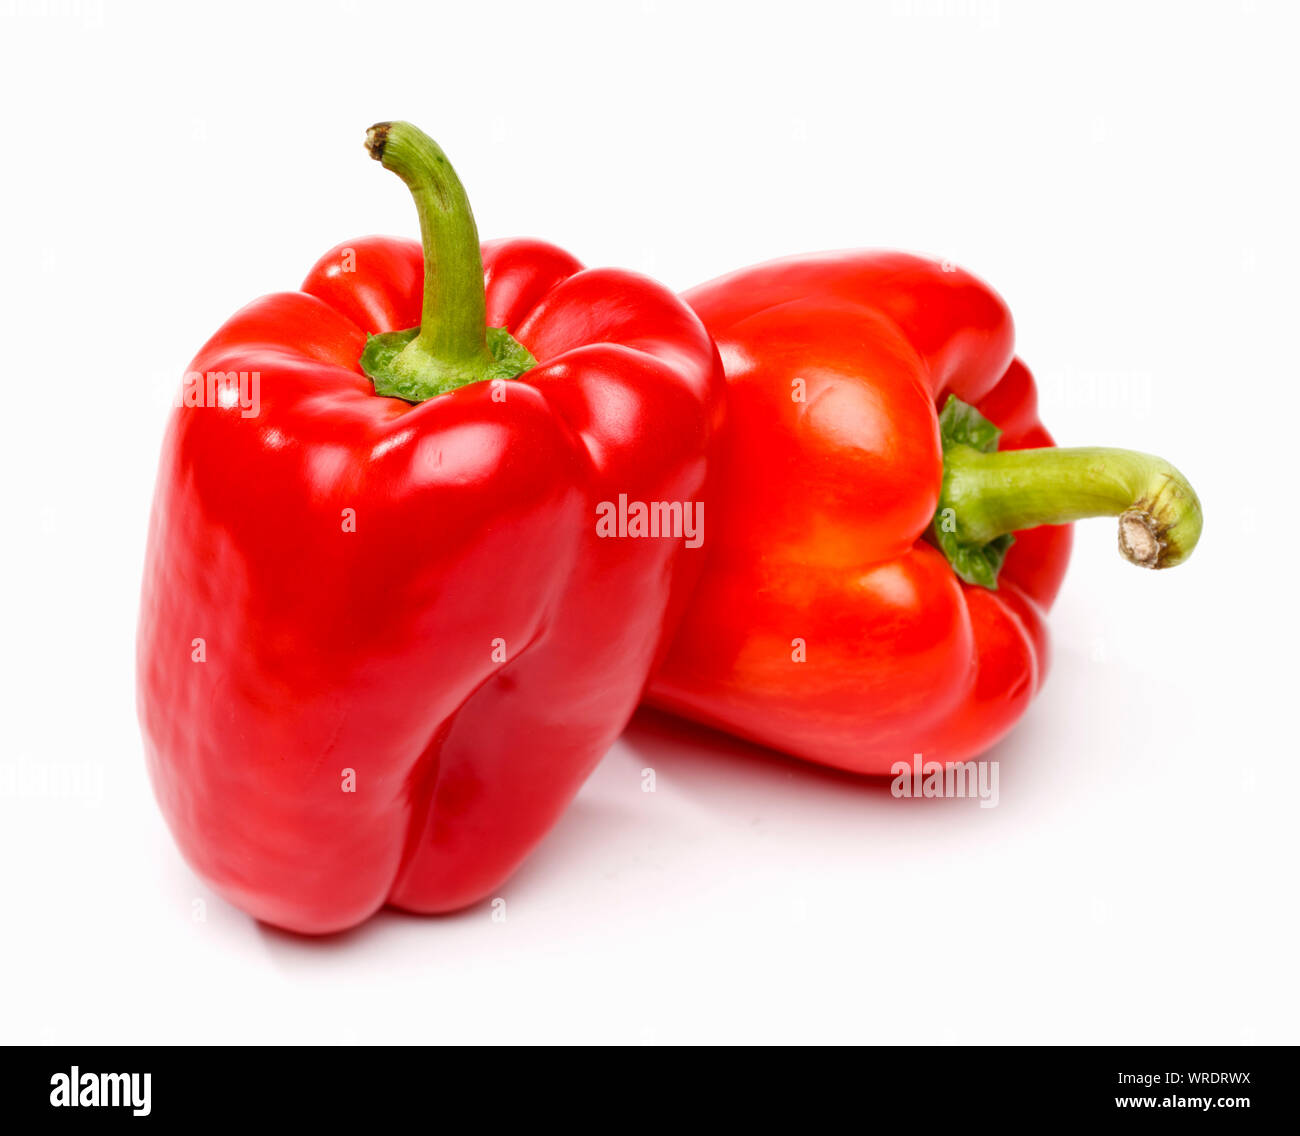 Two red bell peppers on a white background Stock Photo